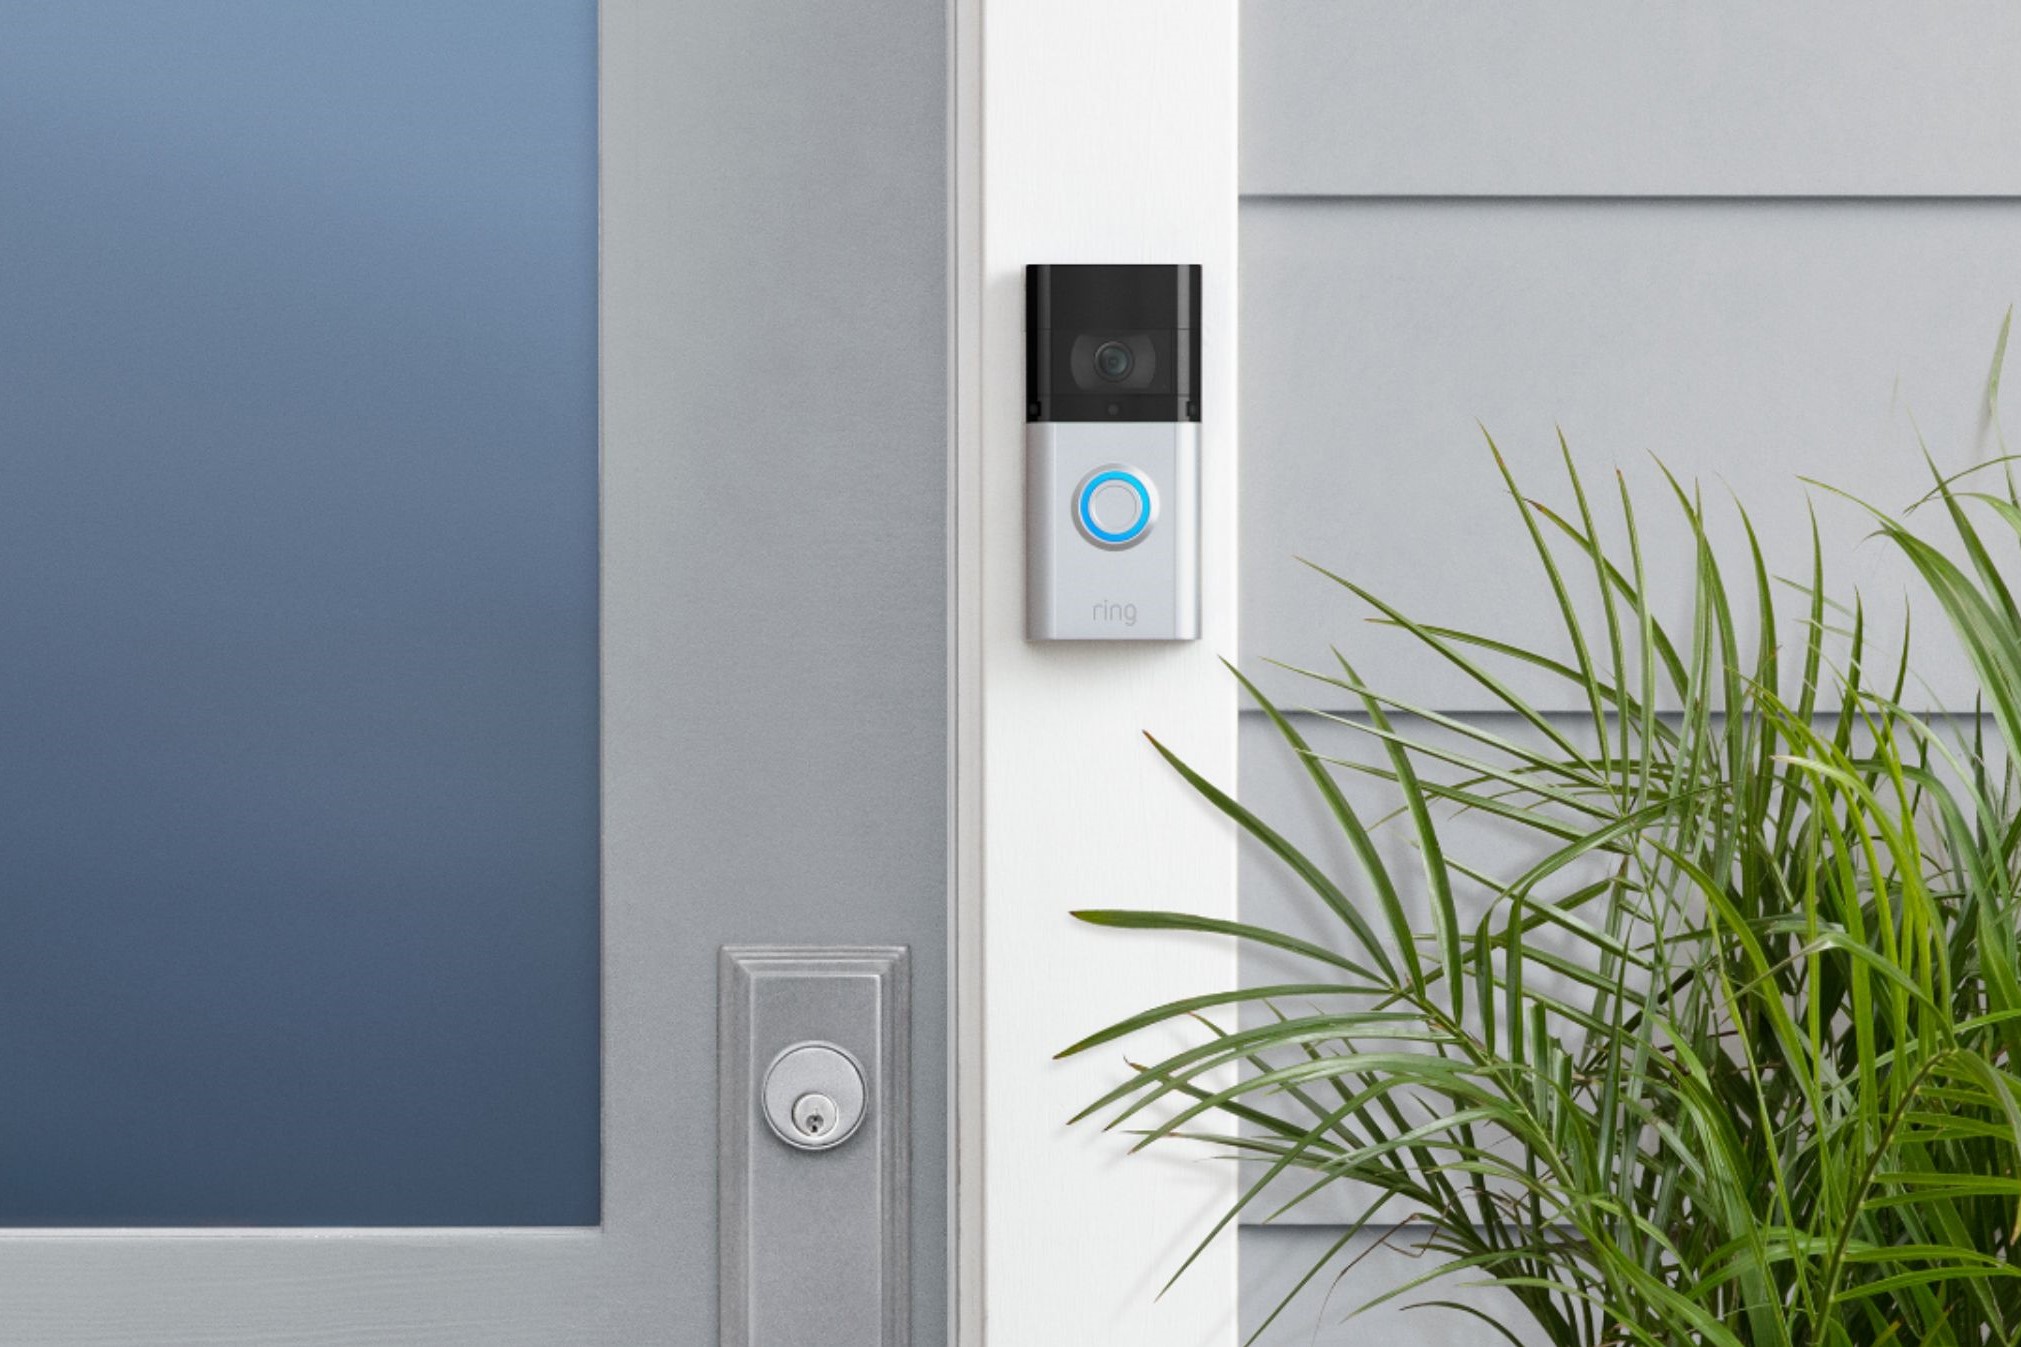 Amazon just bought smart doorbell company Ring